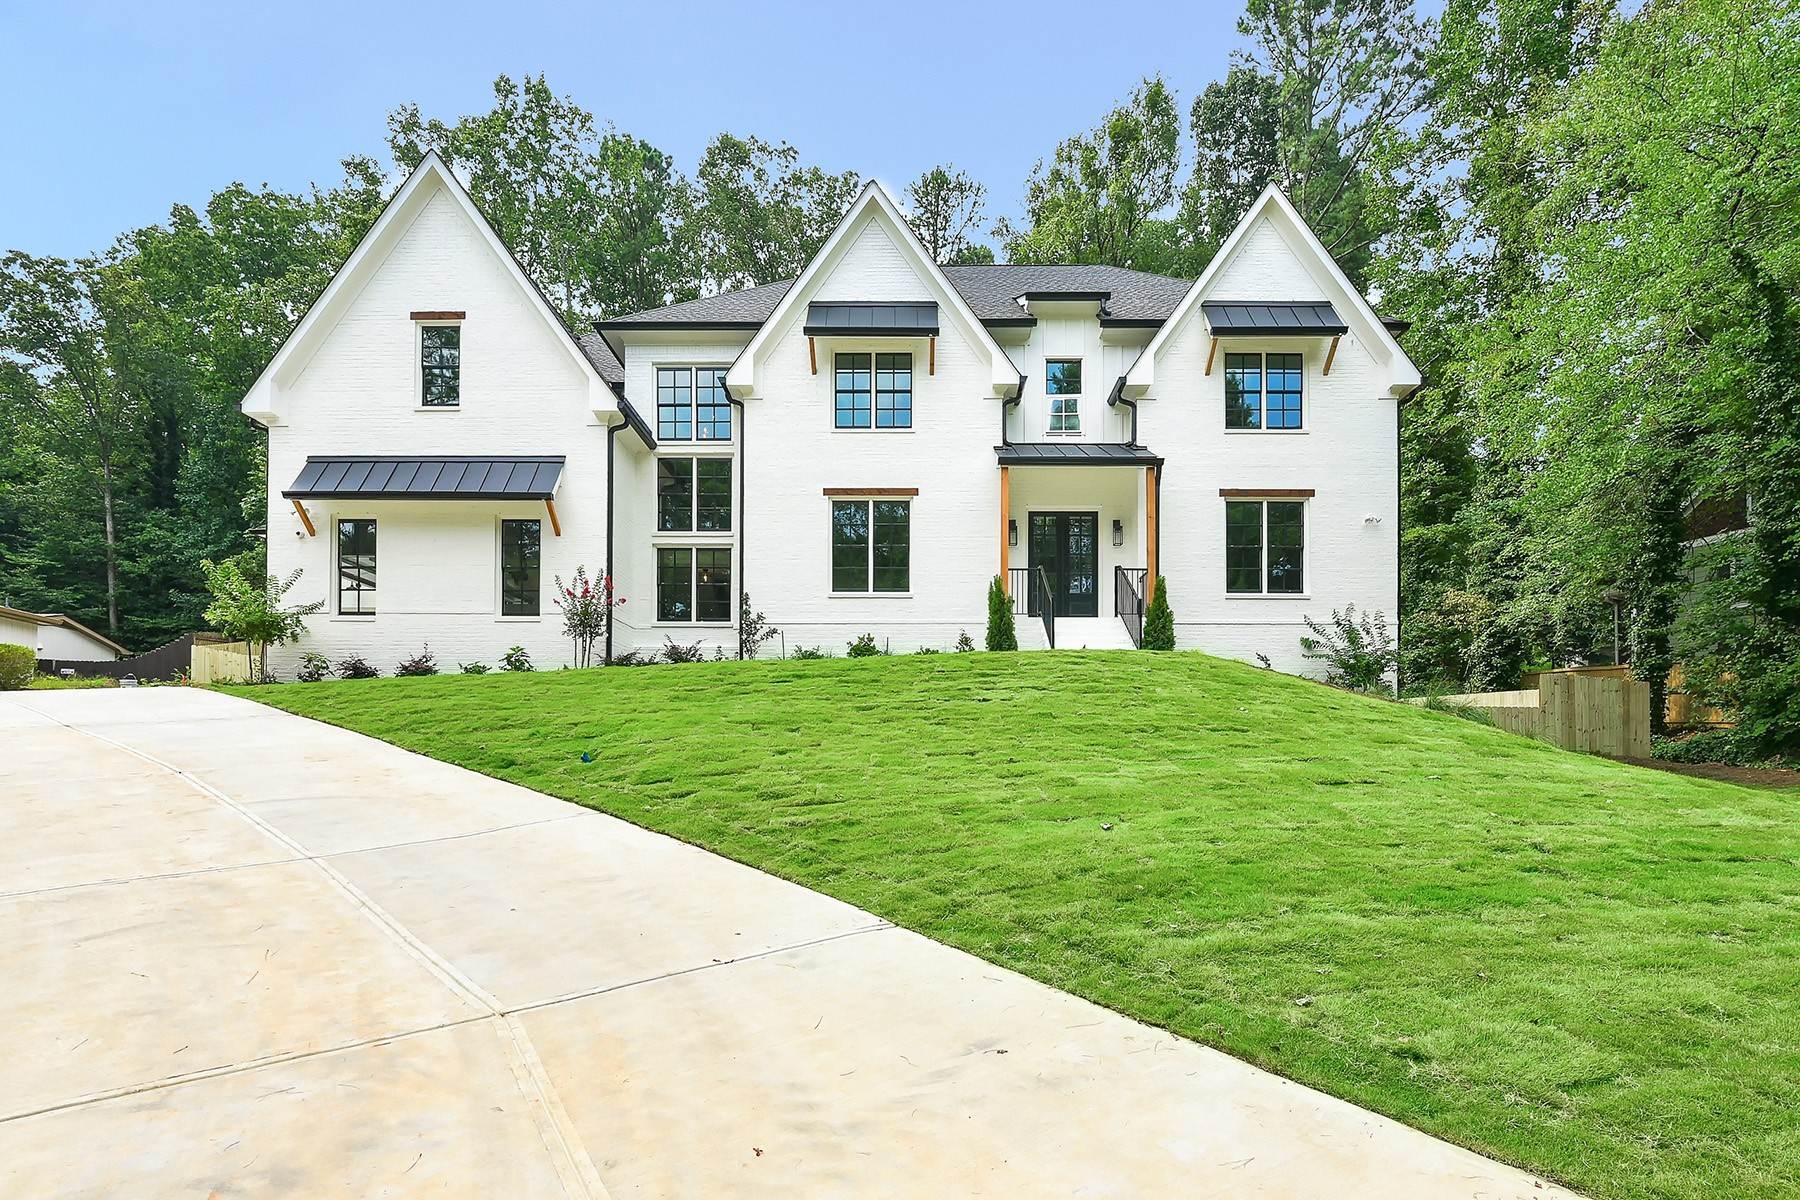 Single Family Homes for Sale at New Construction in Sought-After Walton High School District 4190 Fairgreen Drive Marietta, Georgia 30068 United States